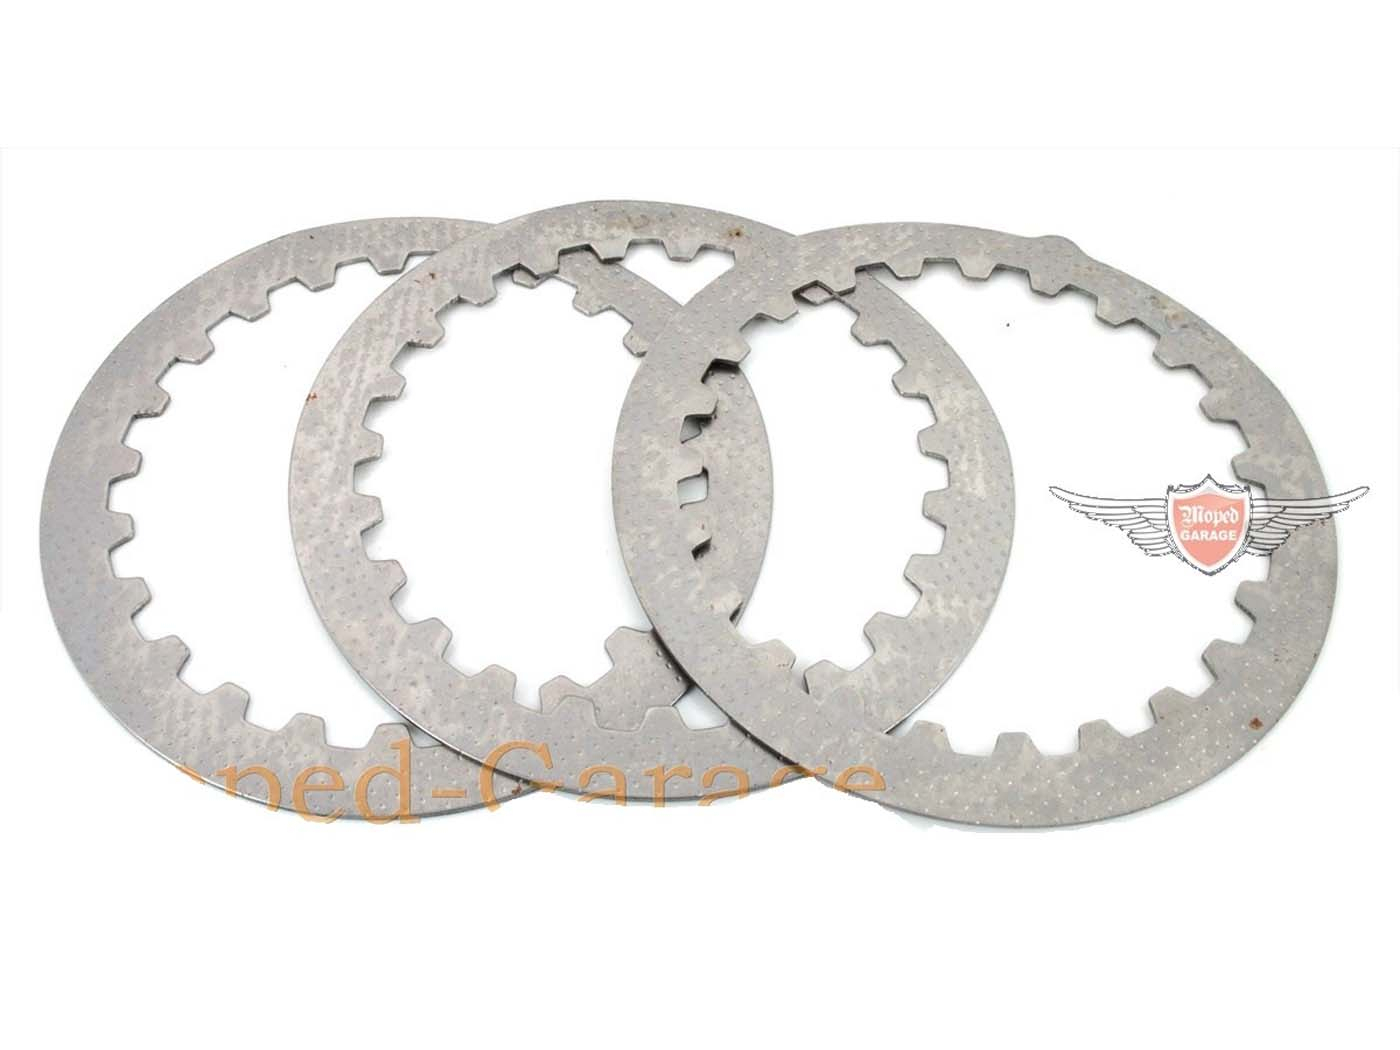 Clutch Plates Steel Plates 3 Pieces For Yamaha DT, RD 50 M, MX, FS 1